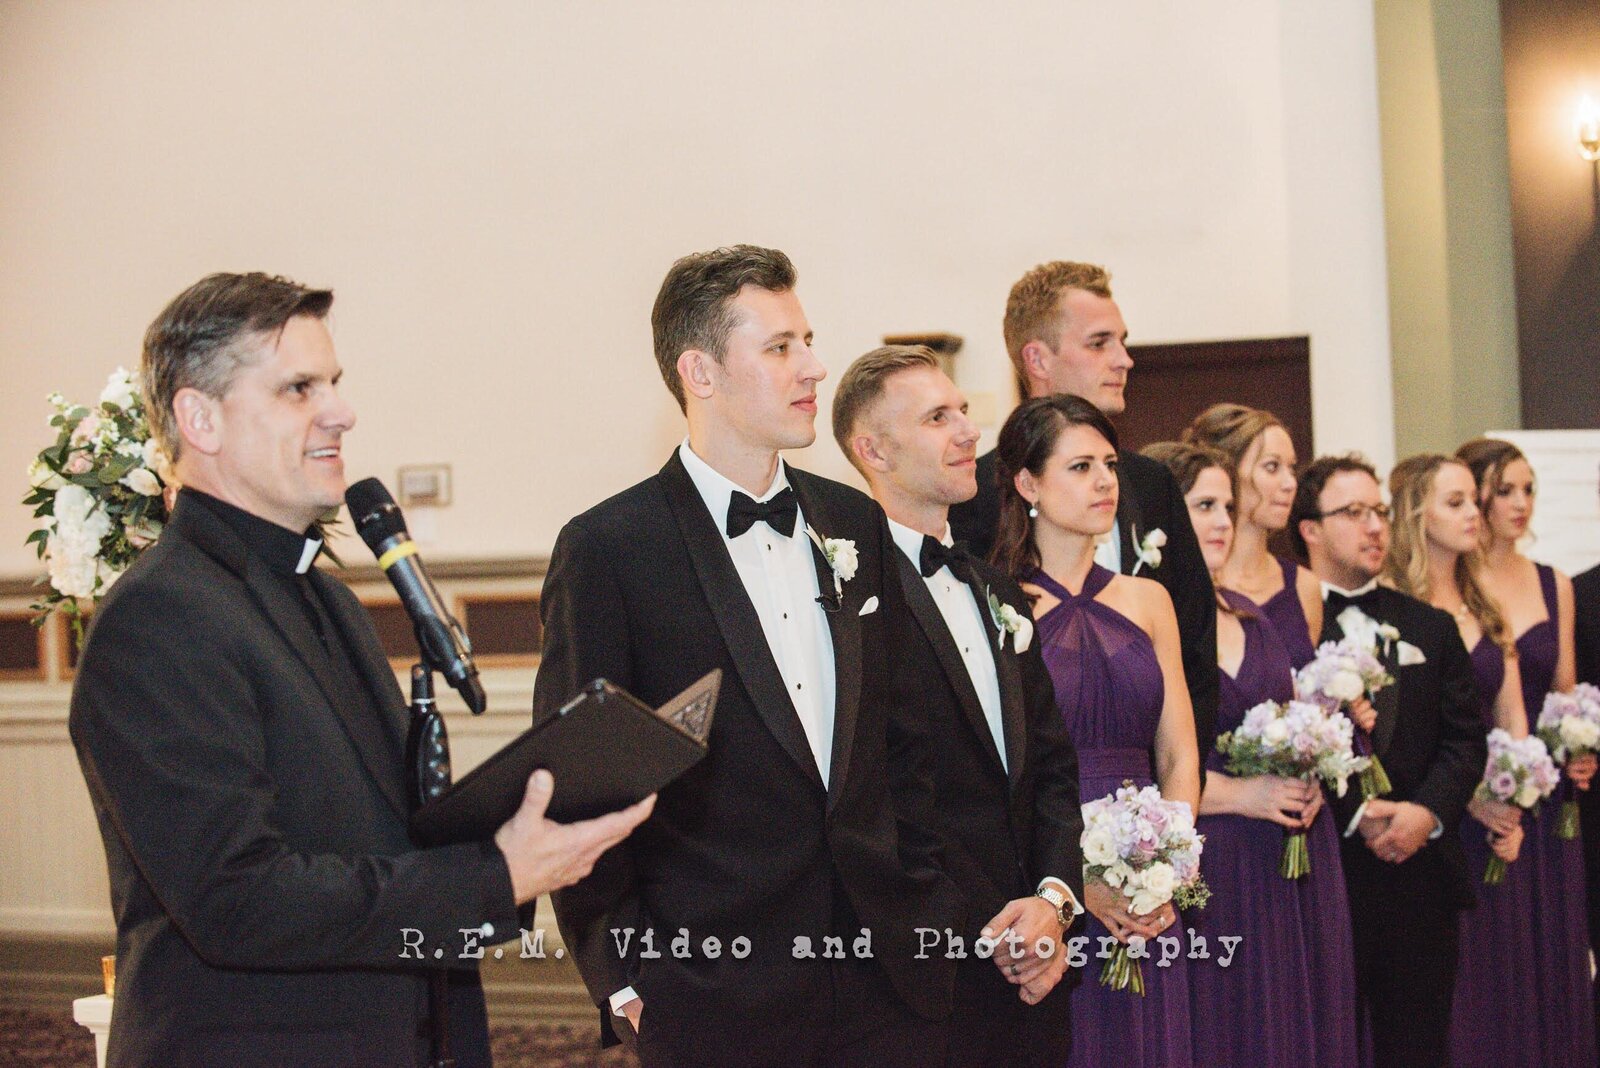 Wedding officiant and groom look down the aisle as bride walks in